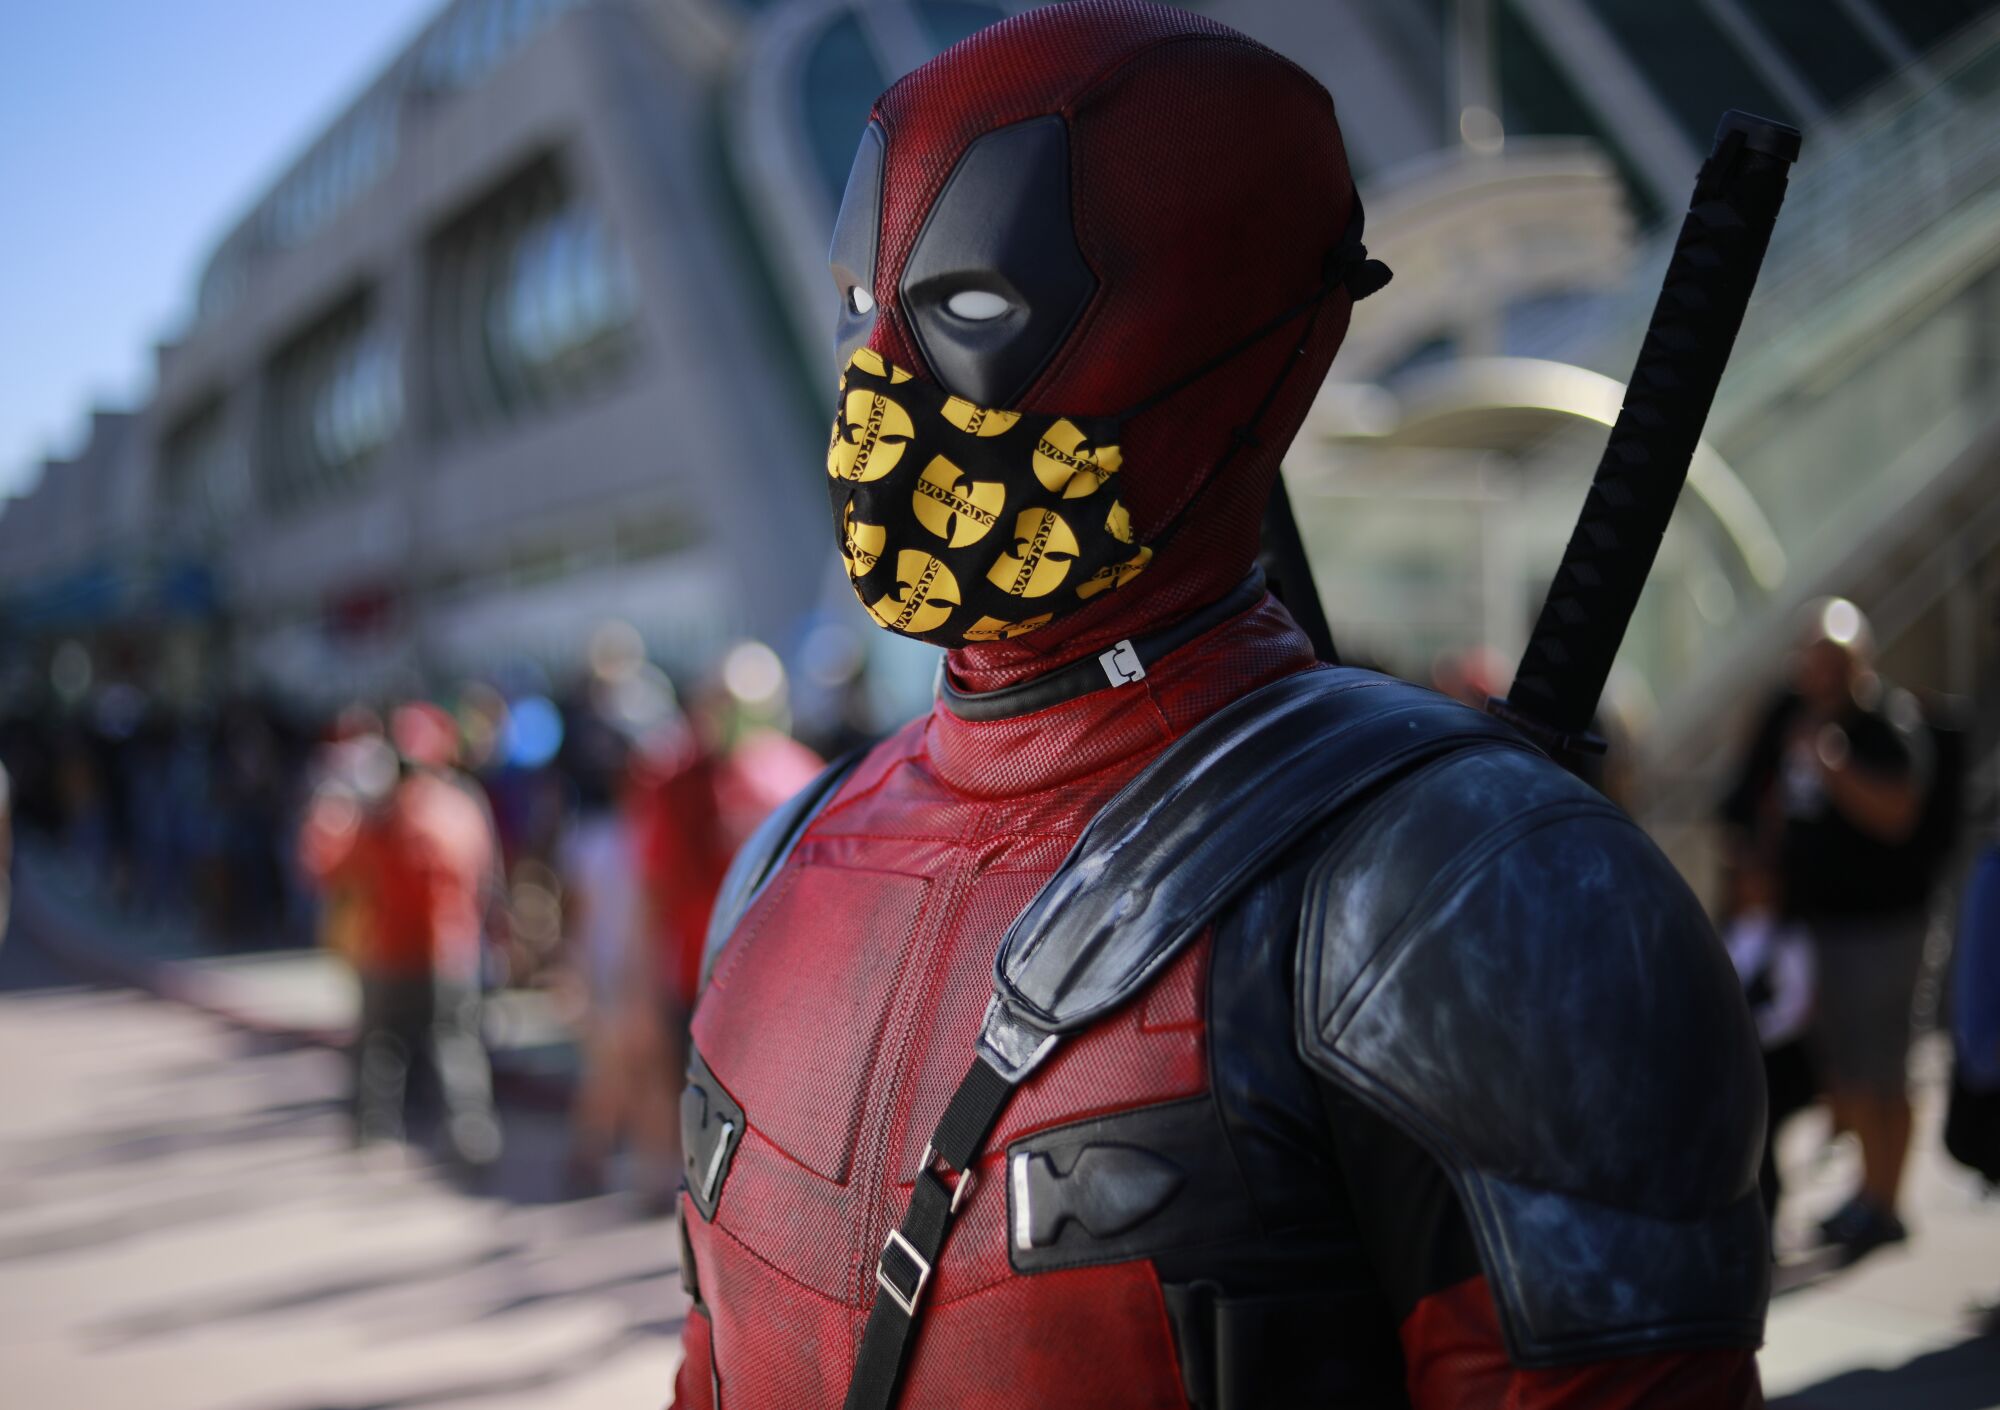 Matt Passiglia of San Diego dressed as Deadpool at Comic-Con Special Edition.